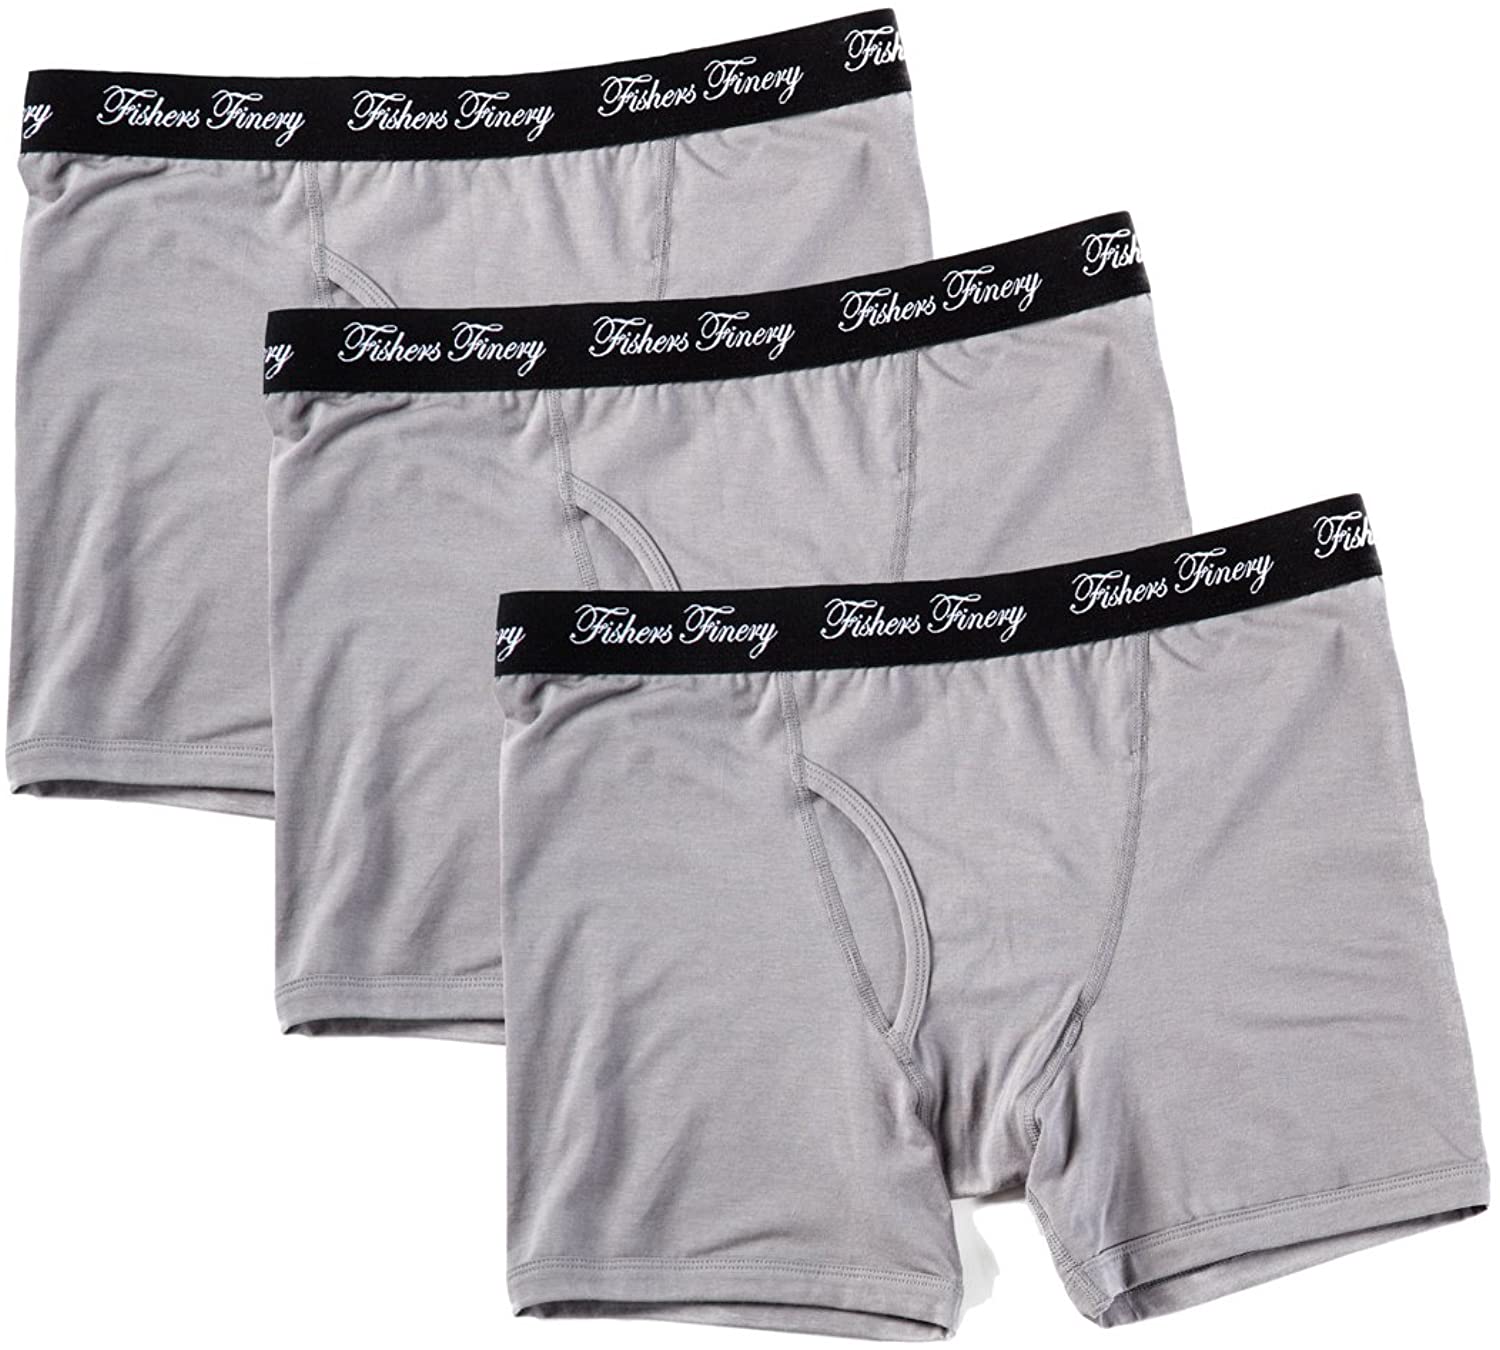 Fishers Finery Mens Modal Boxer Briefs Microfiber Althletic